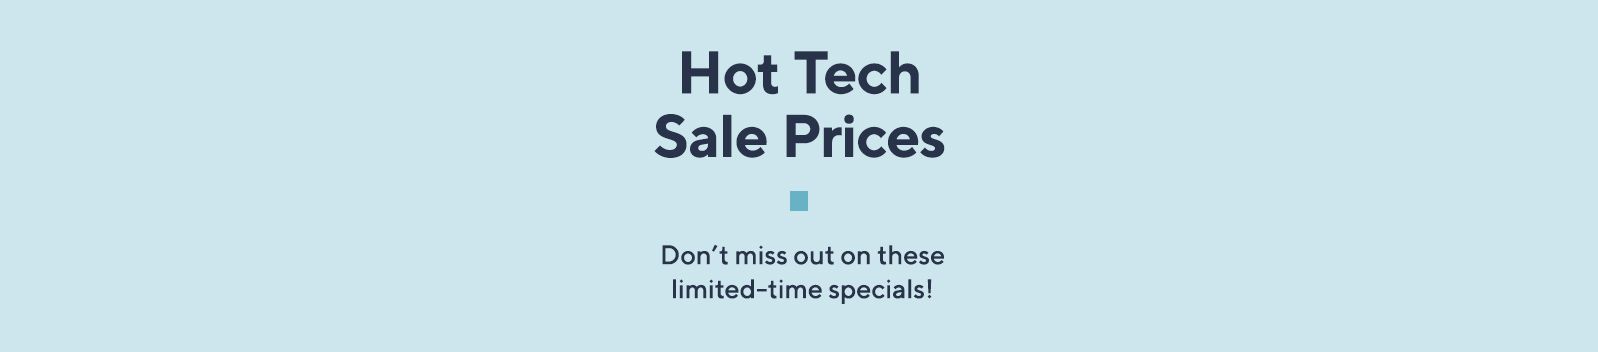 Hot Tech Sale Prices  Don't miss out on these limited-time specials!